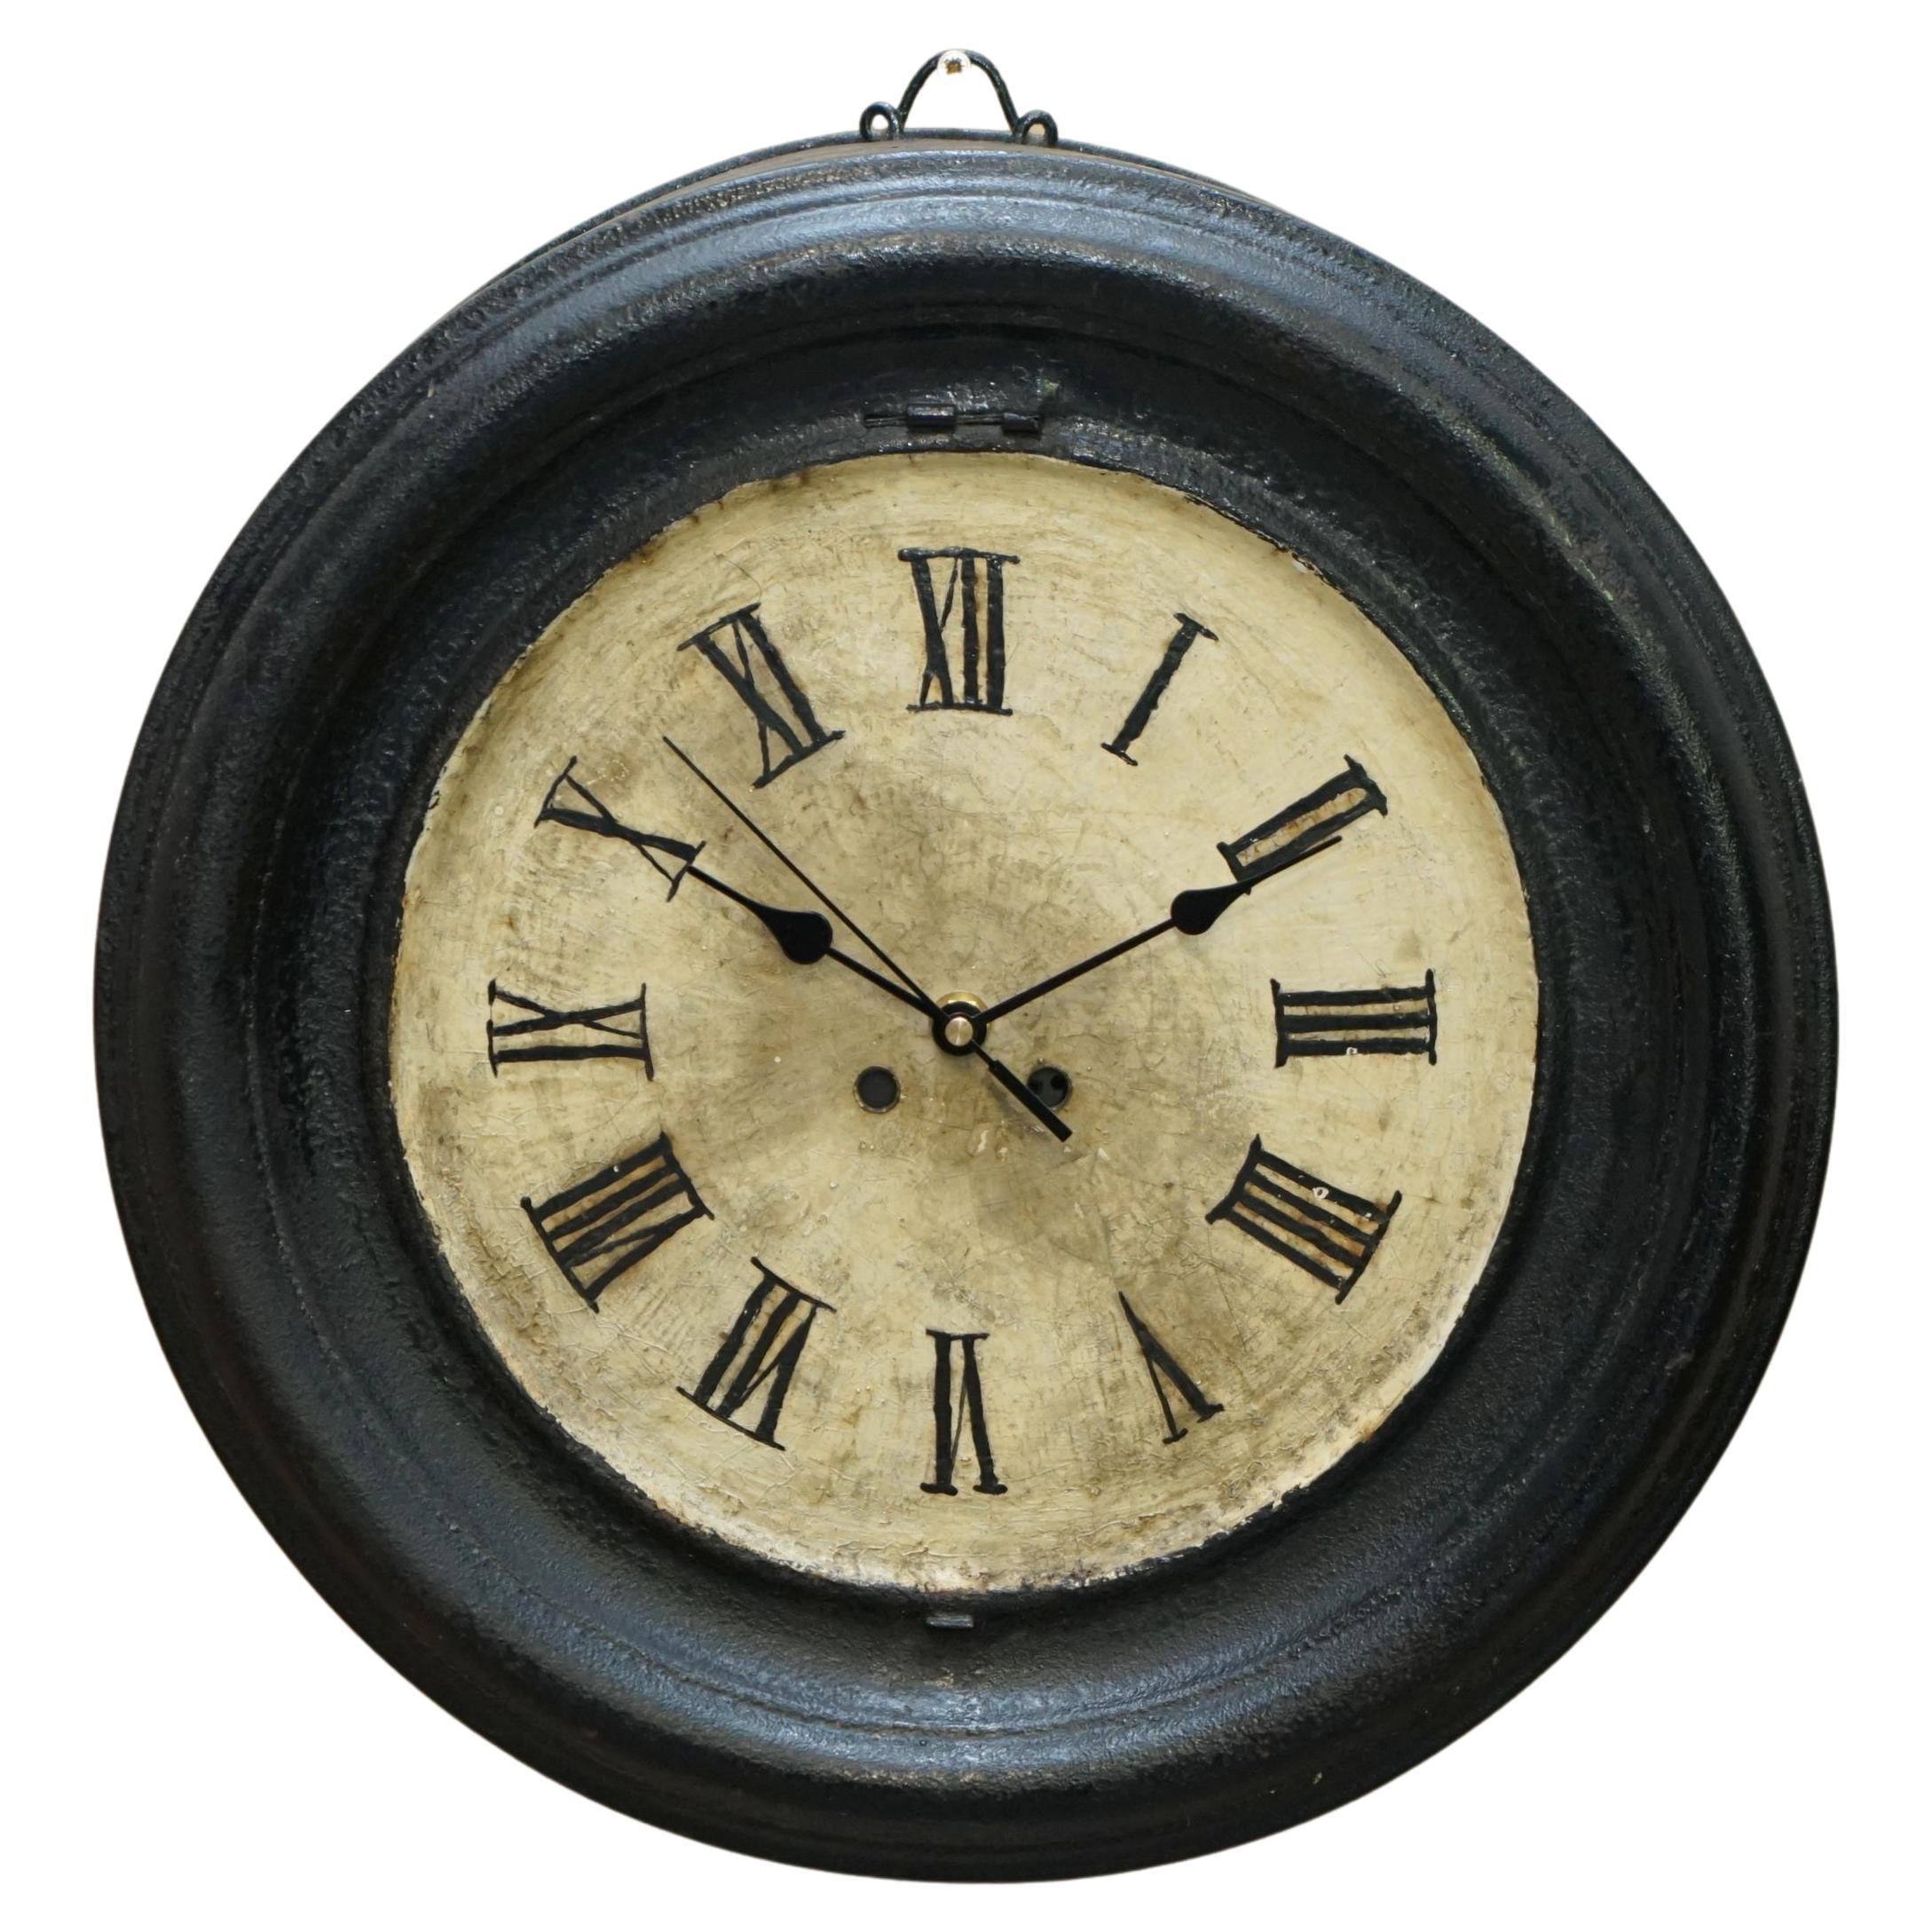 19TH CENTURY FRENCH STEEL WALL CLOCK WiTH NEW MOVEMENT AND ROMAN NUMERALS